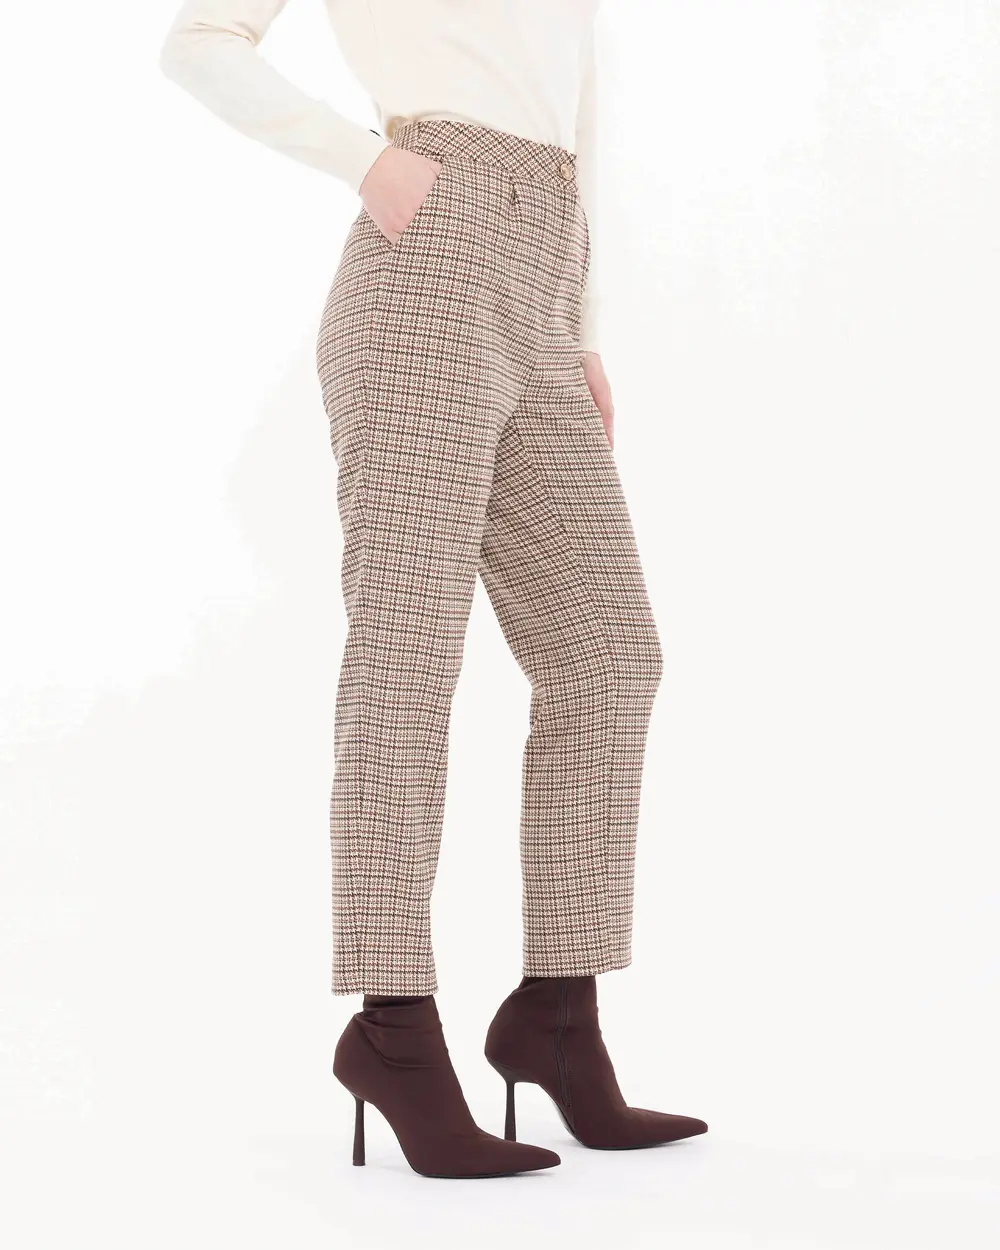 Crowbar Patterned Classic Cut Trousers